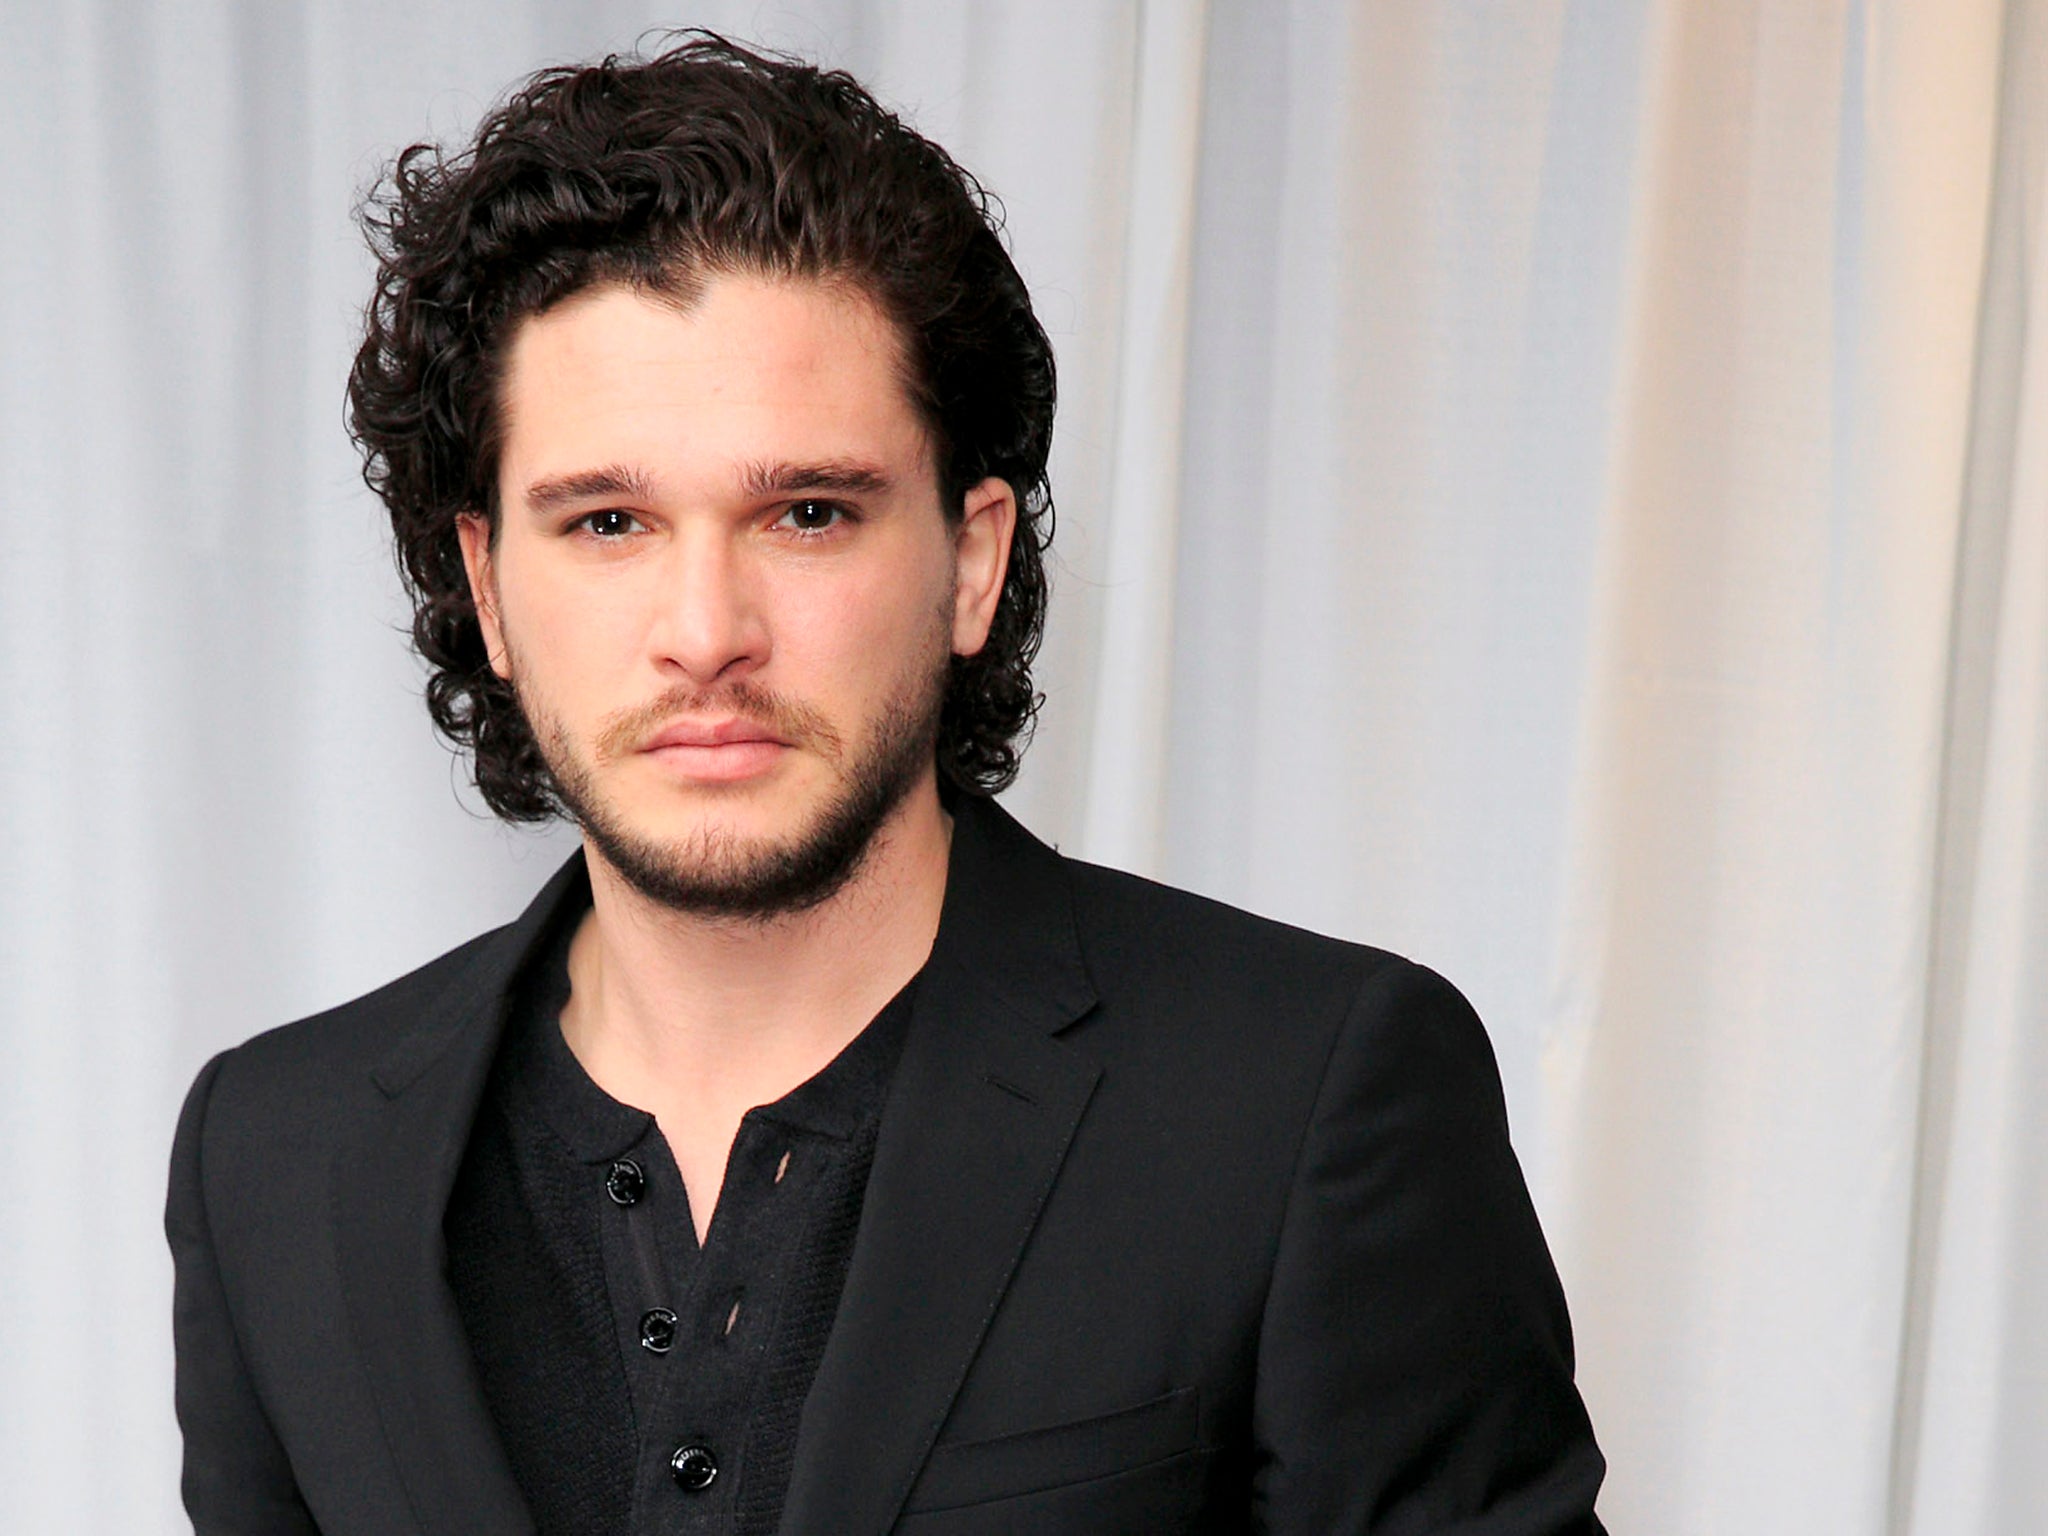 The 'Game of Thrones' star Kit Harington responded to the no food ban by warning that any prejudice towards the younger generation would be disastrous for theatre sales